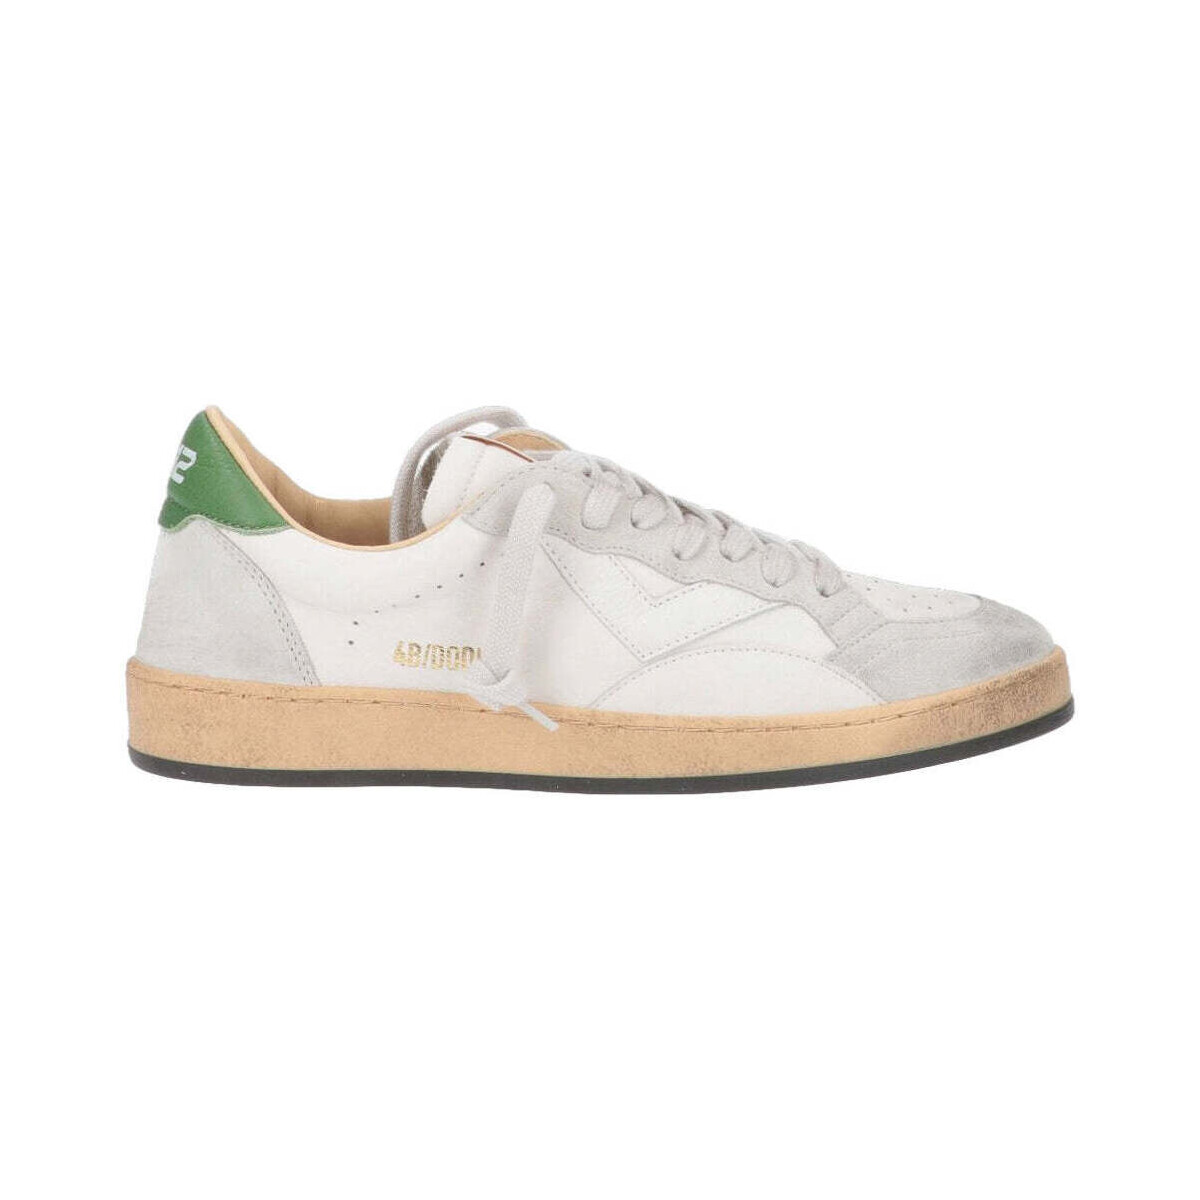 Chaussures Homme Baskets mode 4B12  Blanc